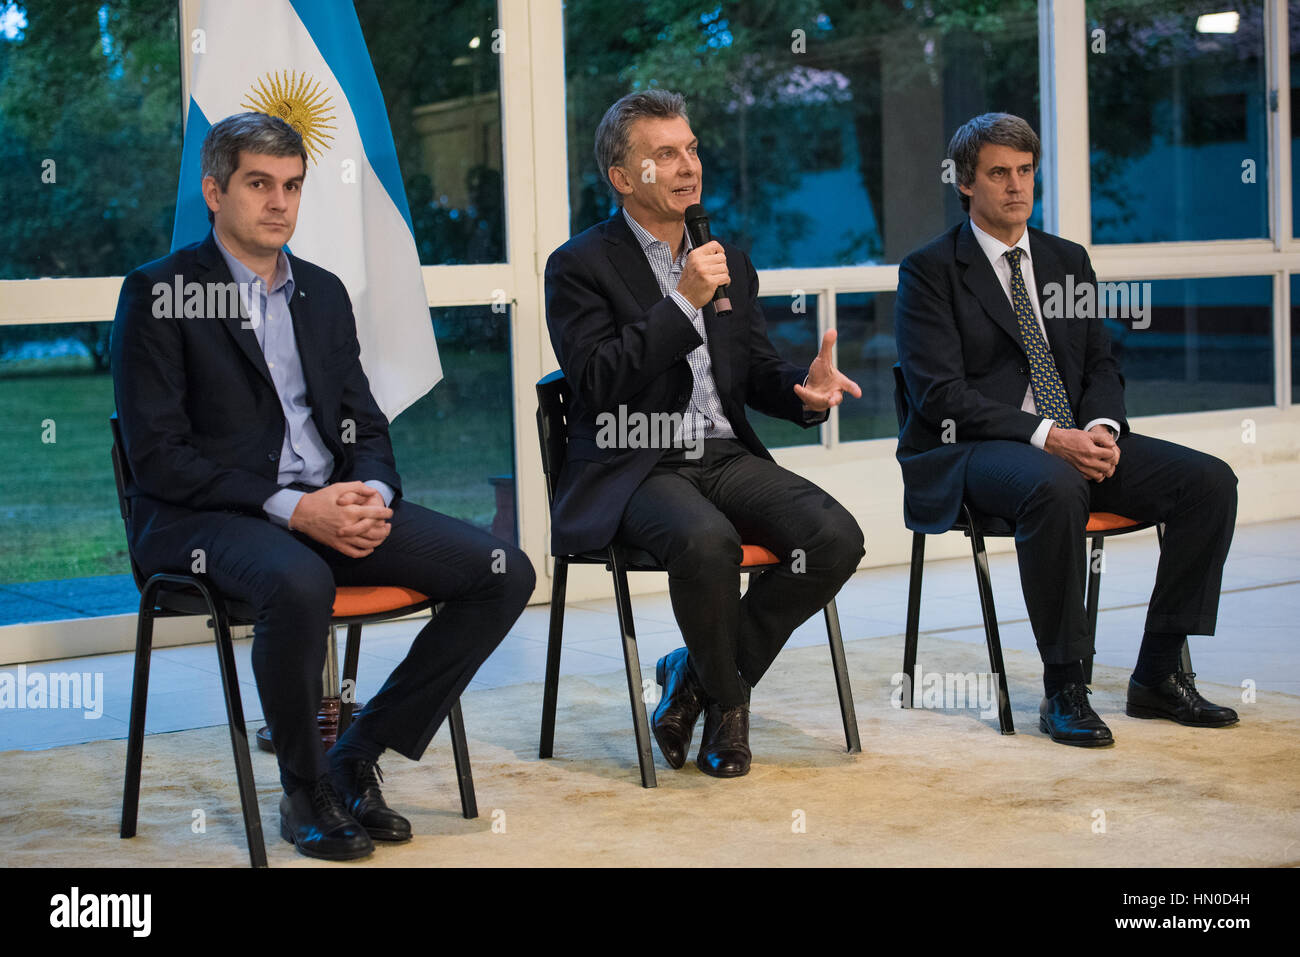 Olivos, Argentina - May 6, 2016: President of Argentina Mauricio Macri (C), Finance Minister Alfonso Prat-Gay (R) and Cabinet Chief Marcos Pena (L). Stock Photo